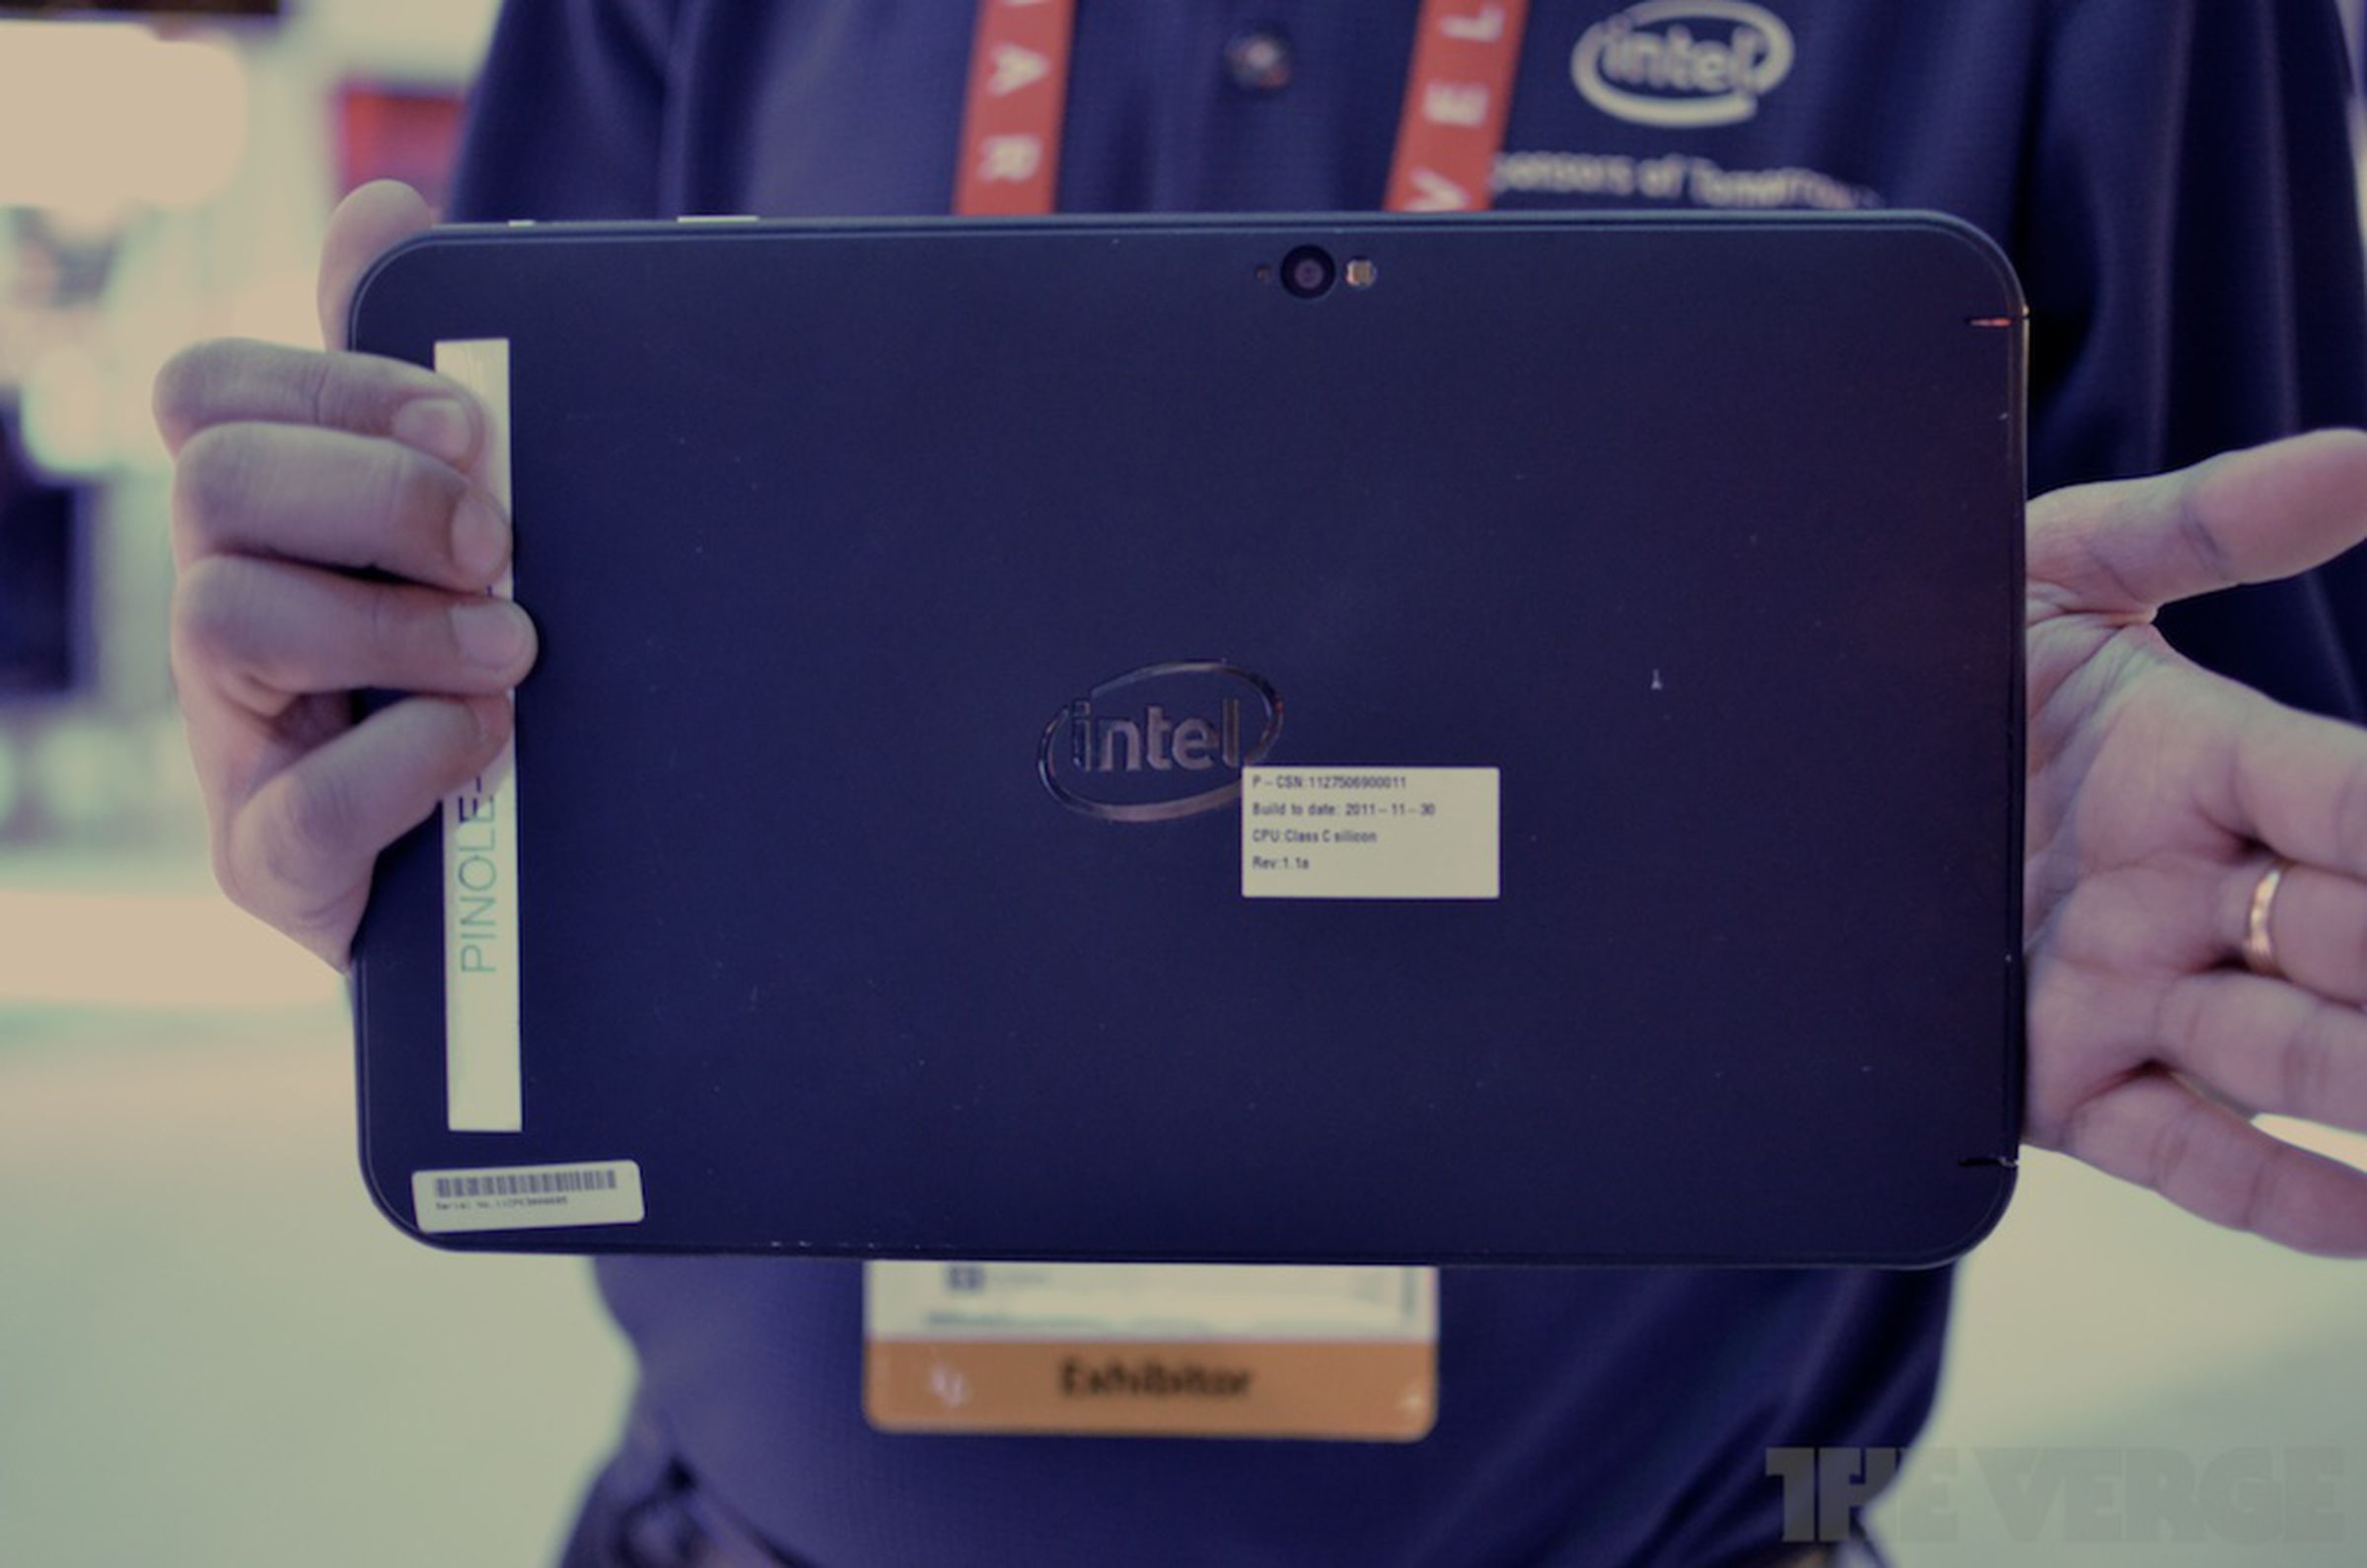 Intel Clover Trail Tablet hands on pictures